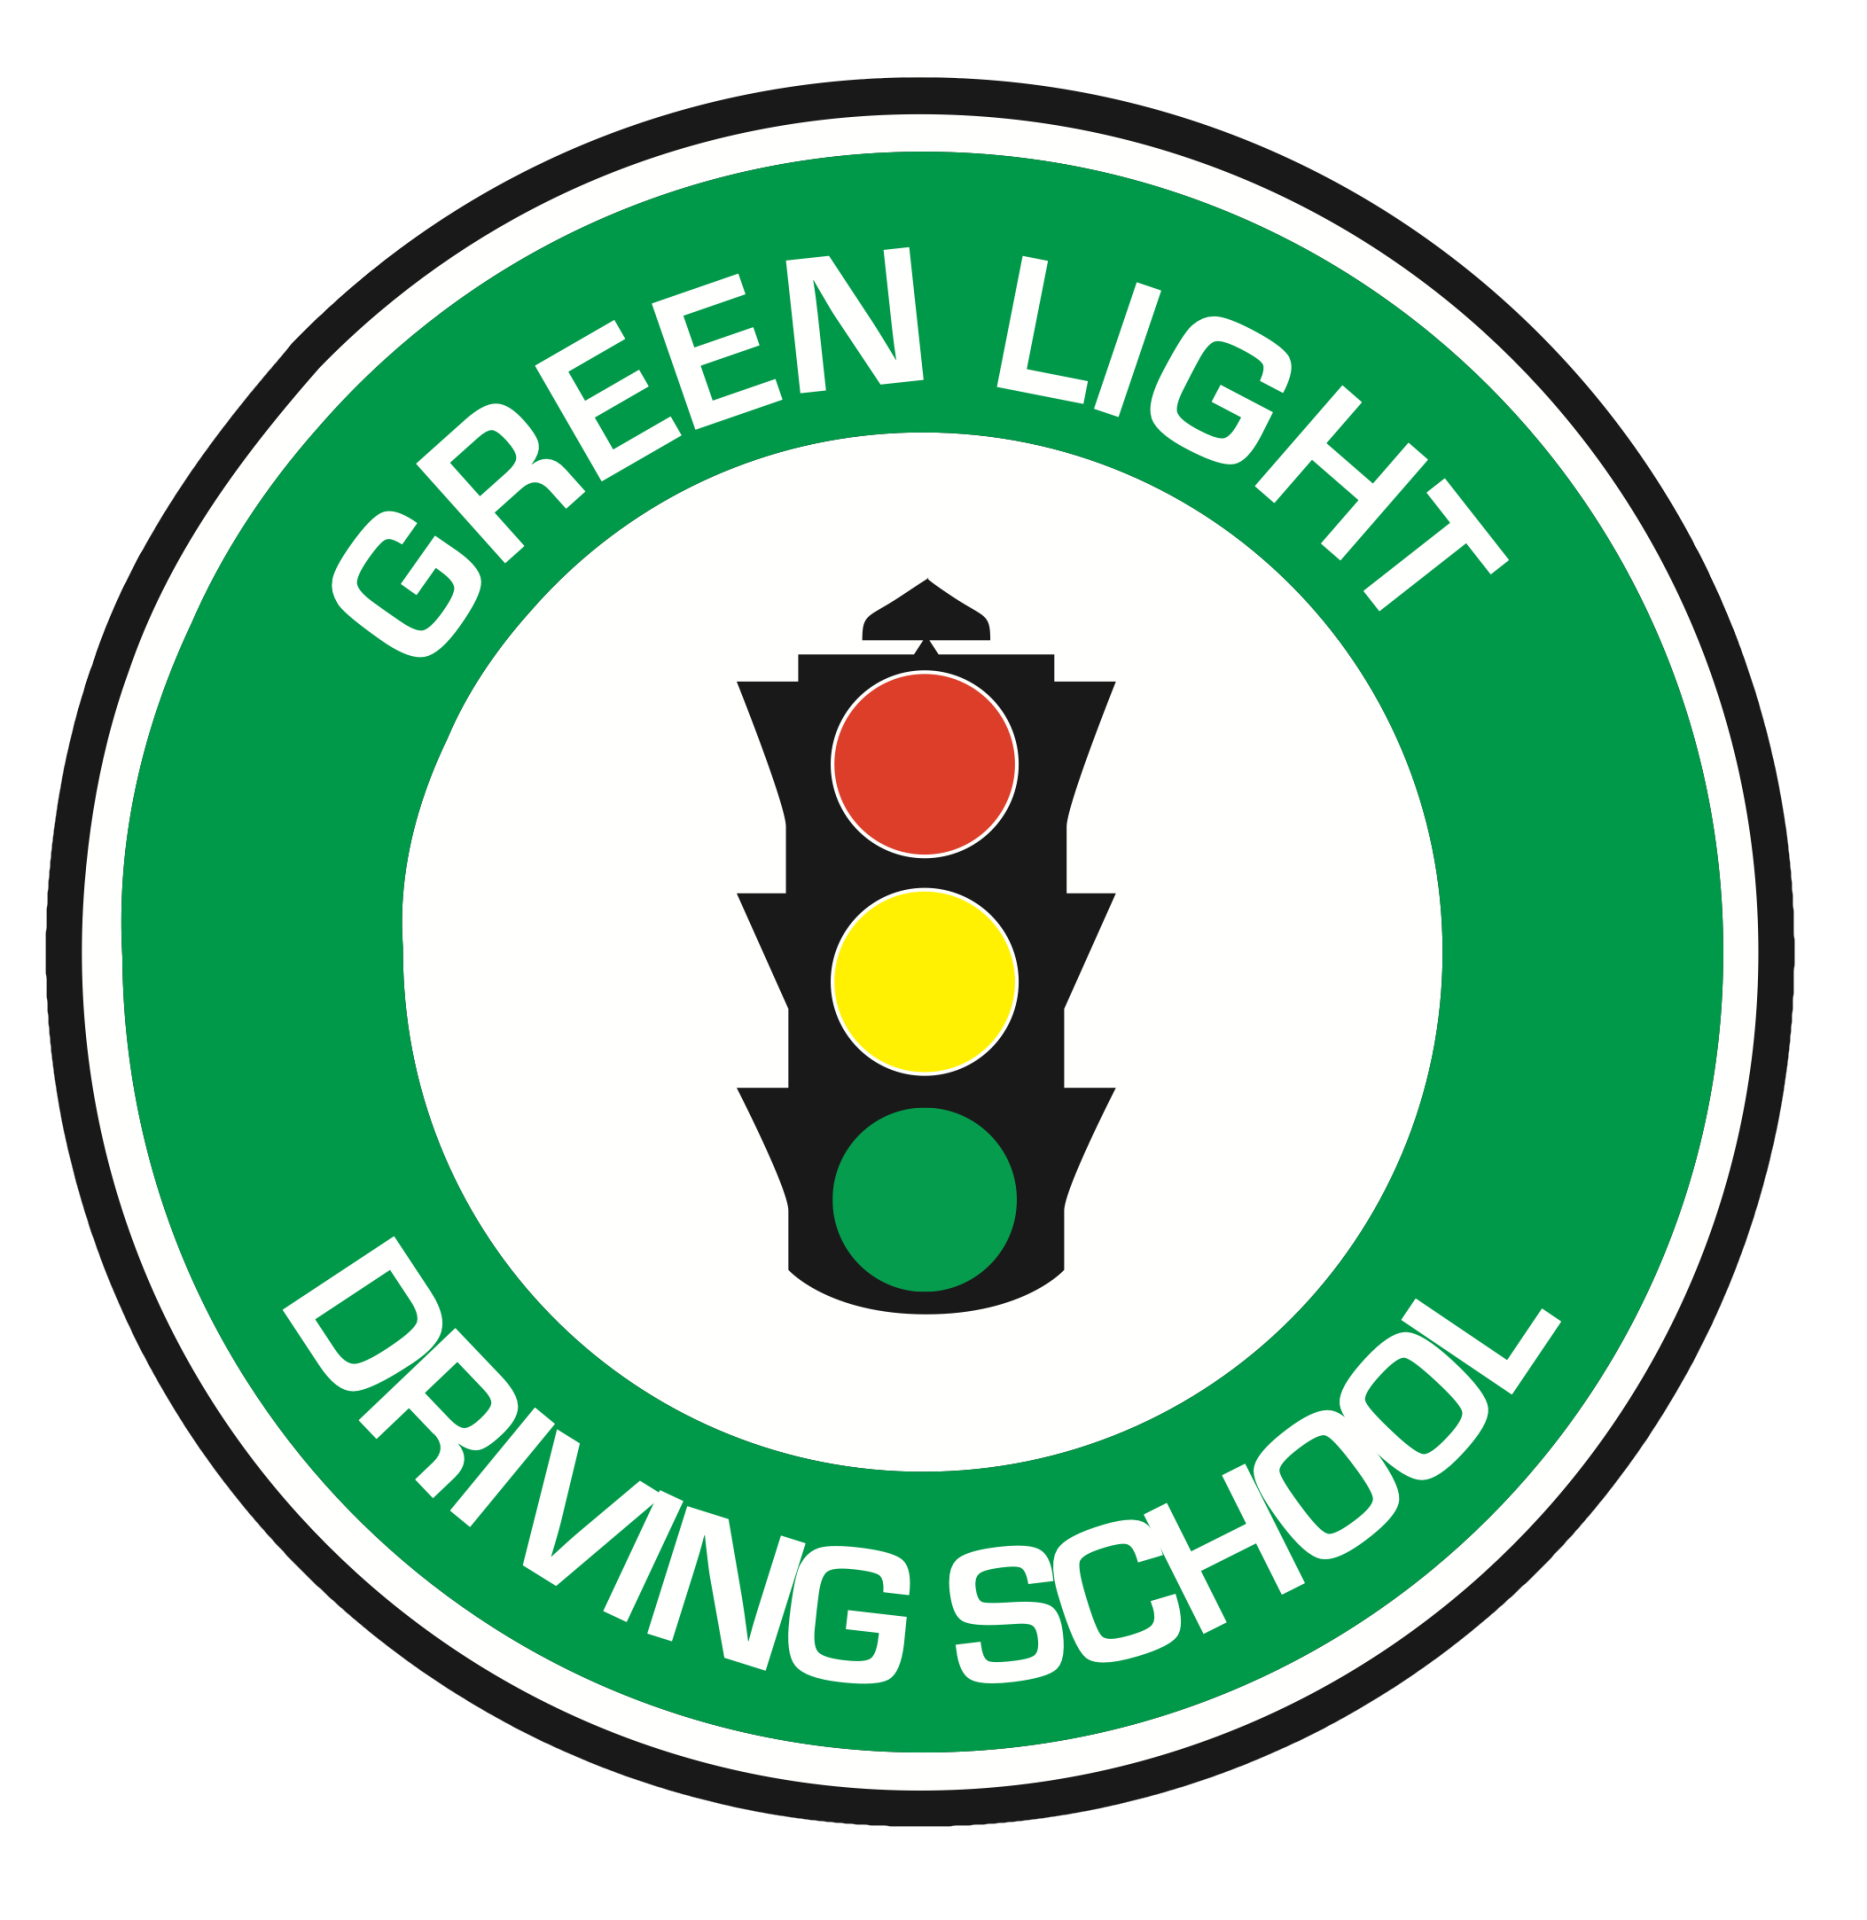 Green Light Driving School. Sycamore Chamber of Commerce.